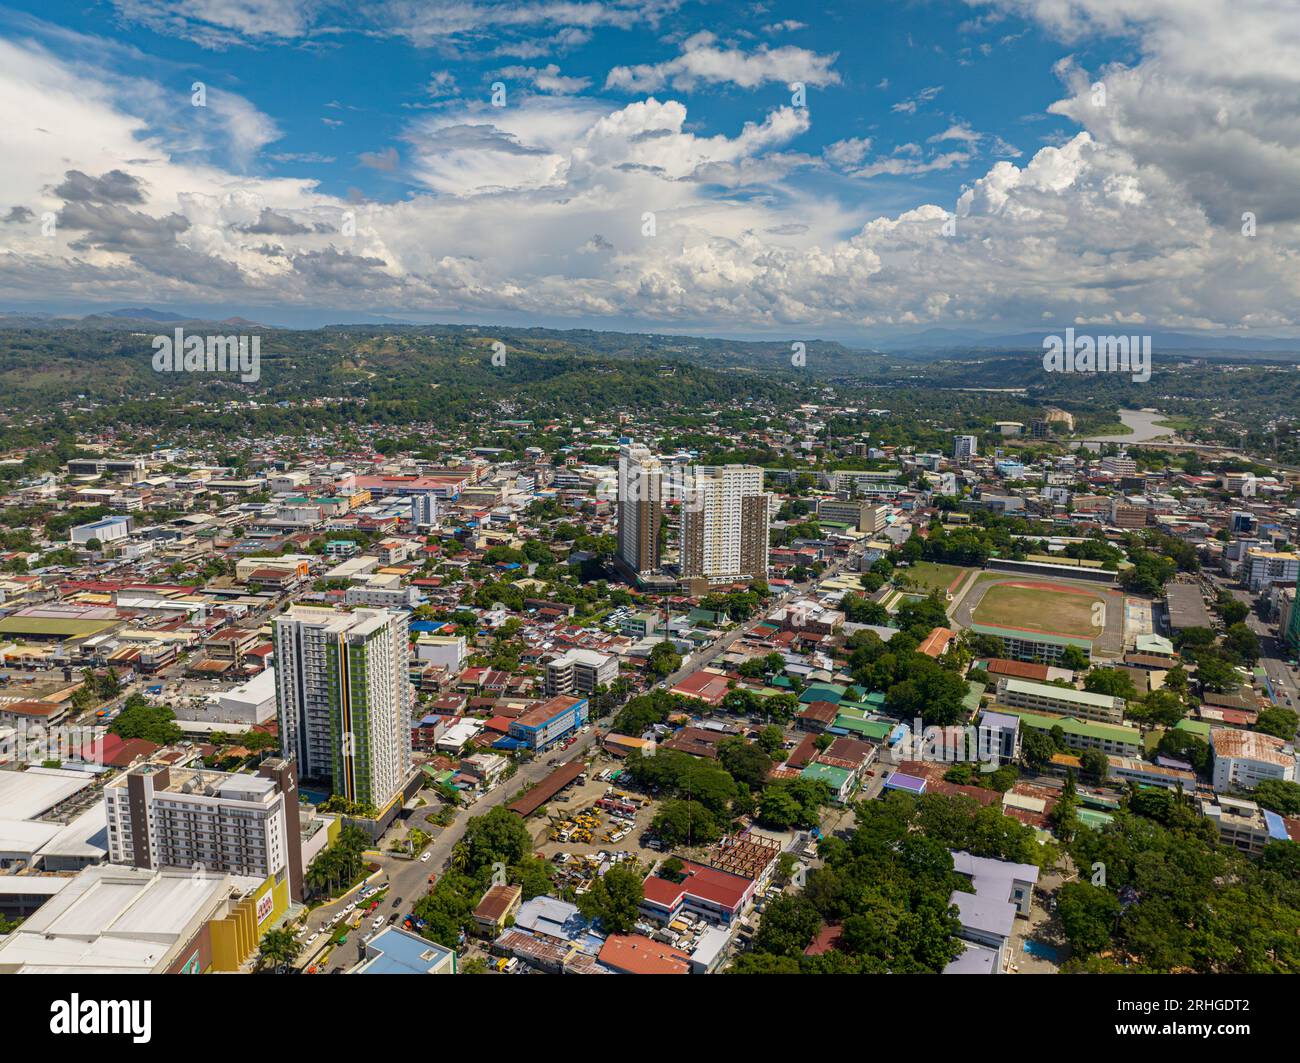 Top view of commercial buildings in Cagayan de Oro City. Northern Mindanao, Philippines. Stock Photo